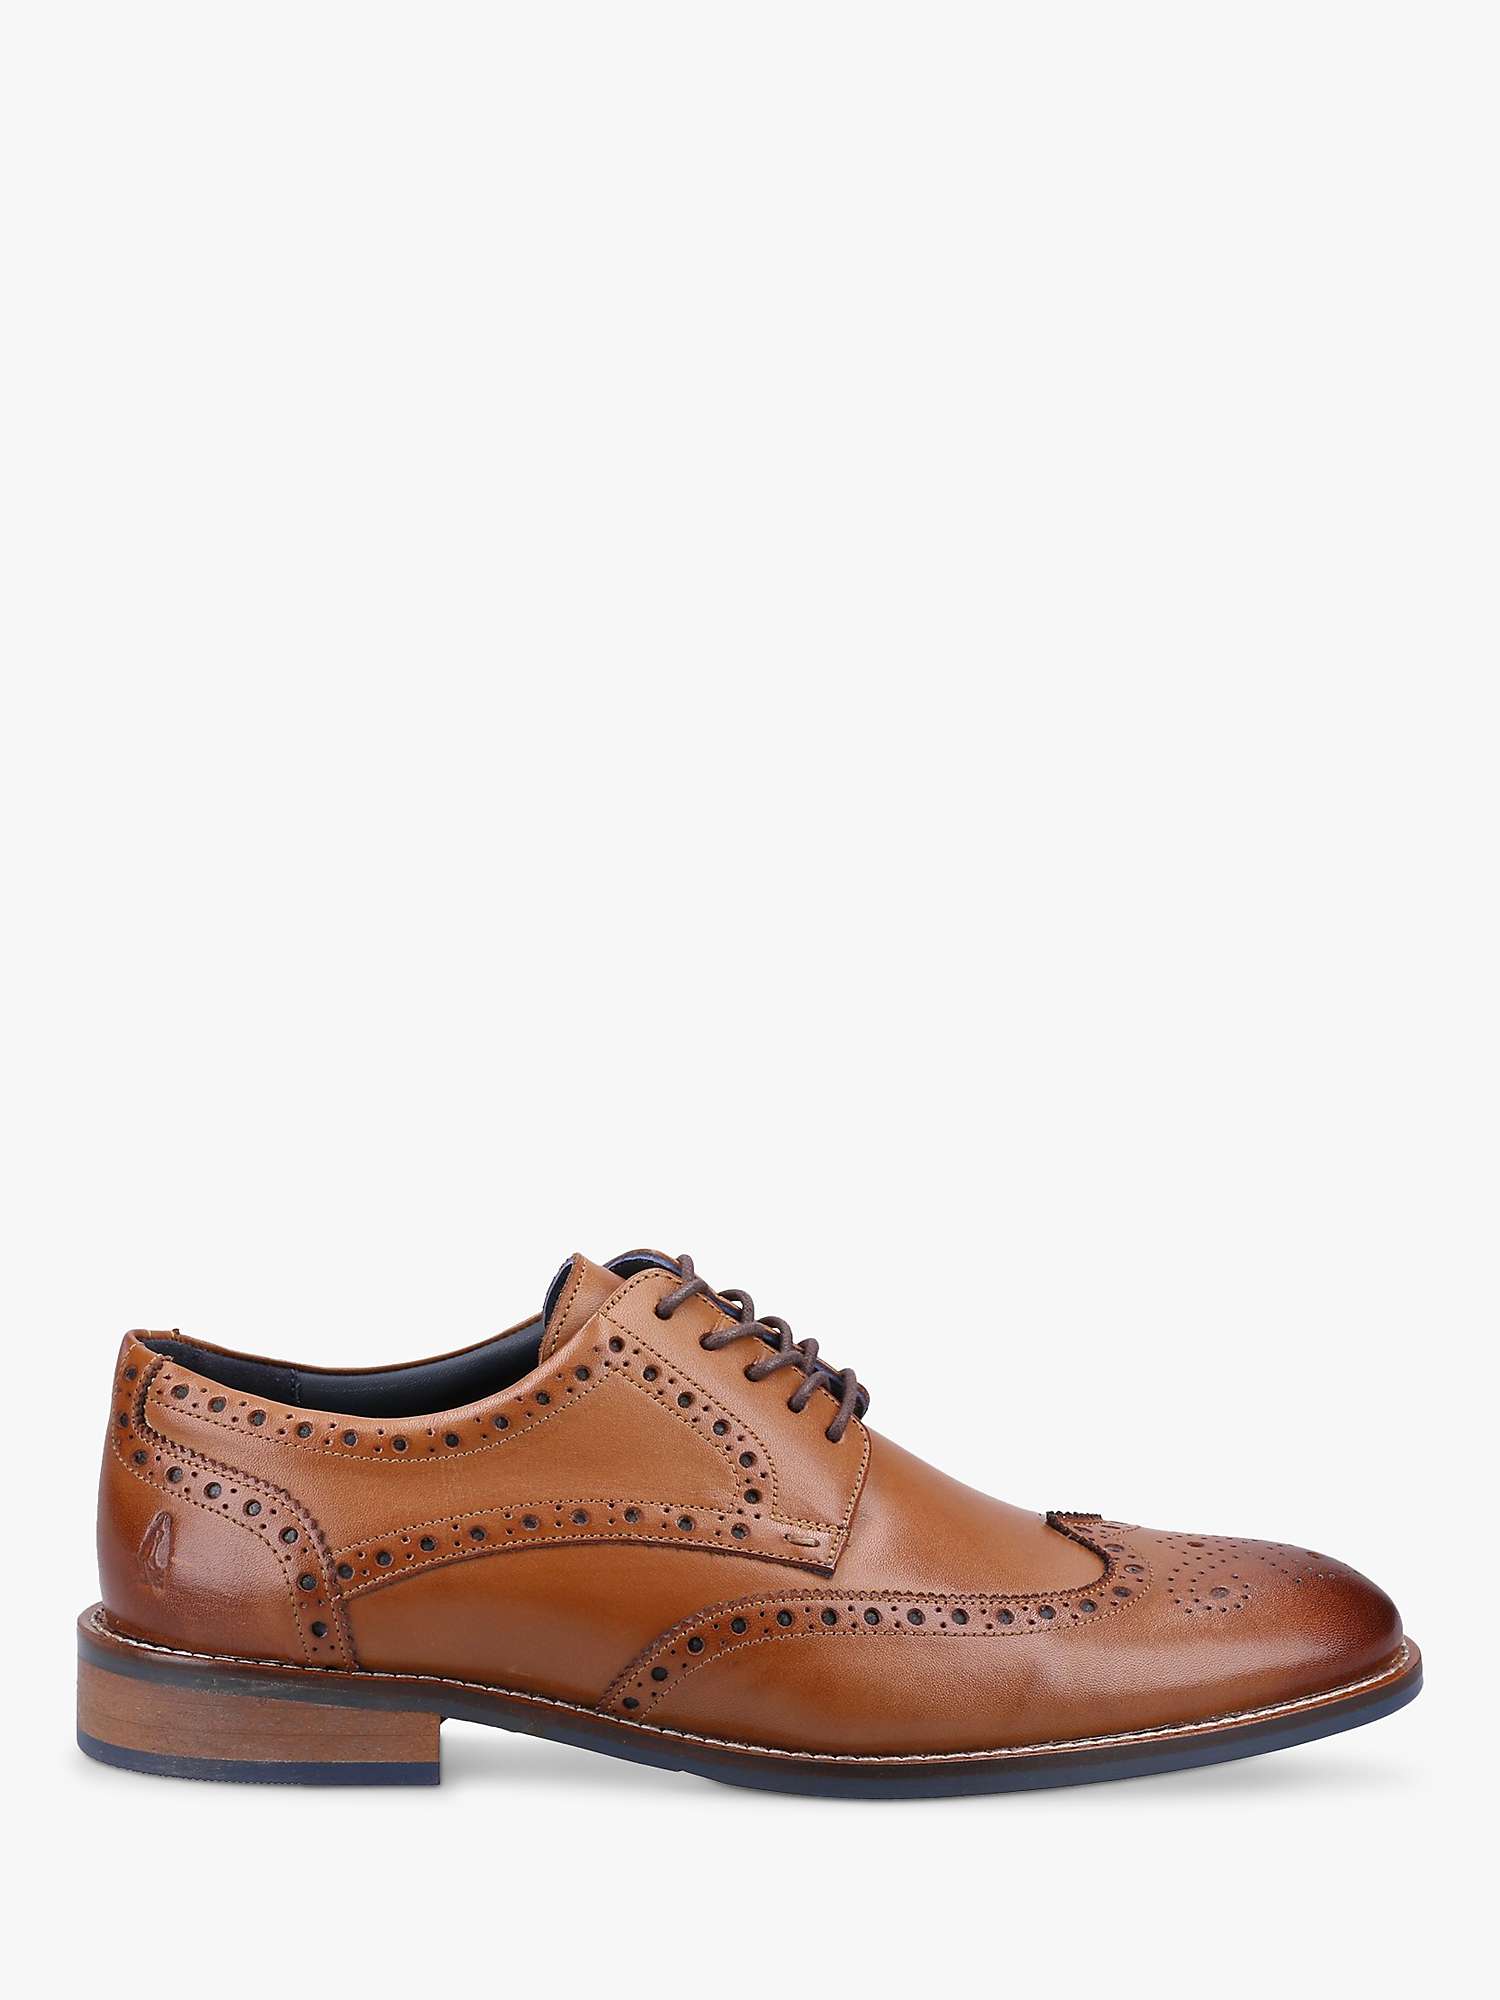 Buy Hush Puppies Dustin Leather Brogues Online at johnlewis.com